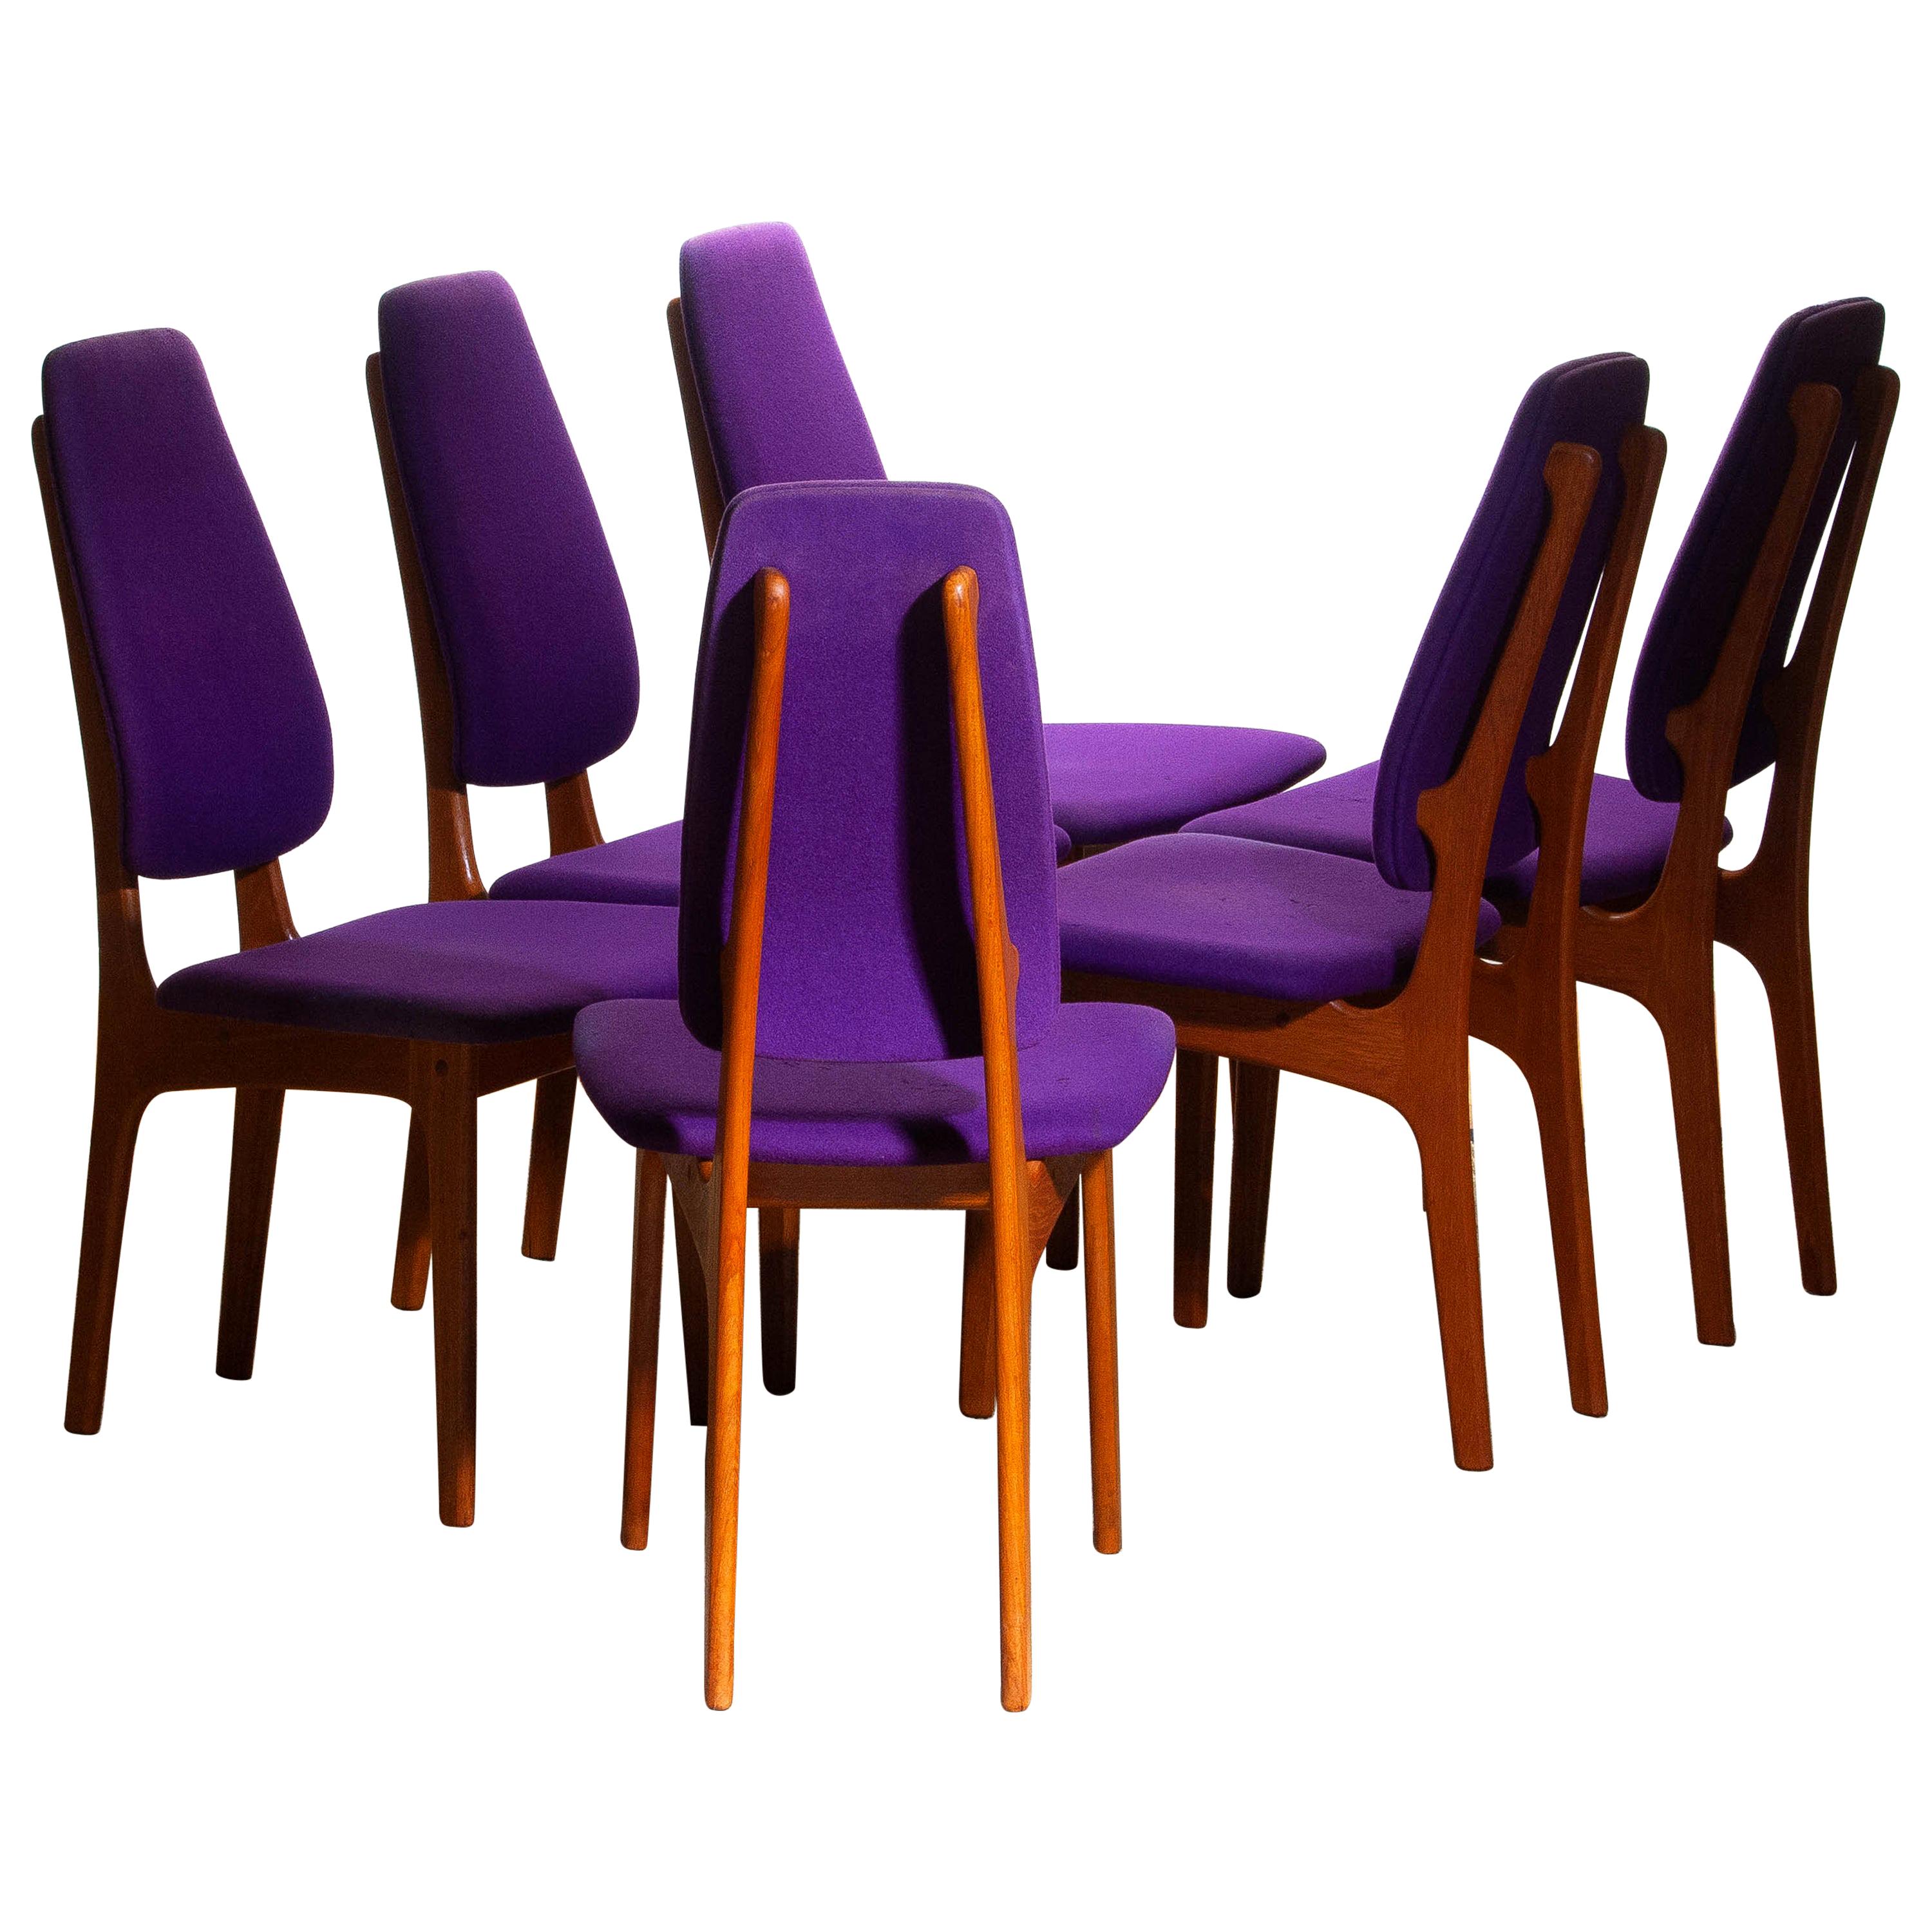 Rare set of six dining chairs from the 1960s in teak designed by Erik Buch for O.D. Møbler A.S., Denmark.
Beautiful aspects are the slim and high back rests.
Chairs are marked 